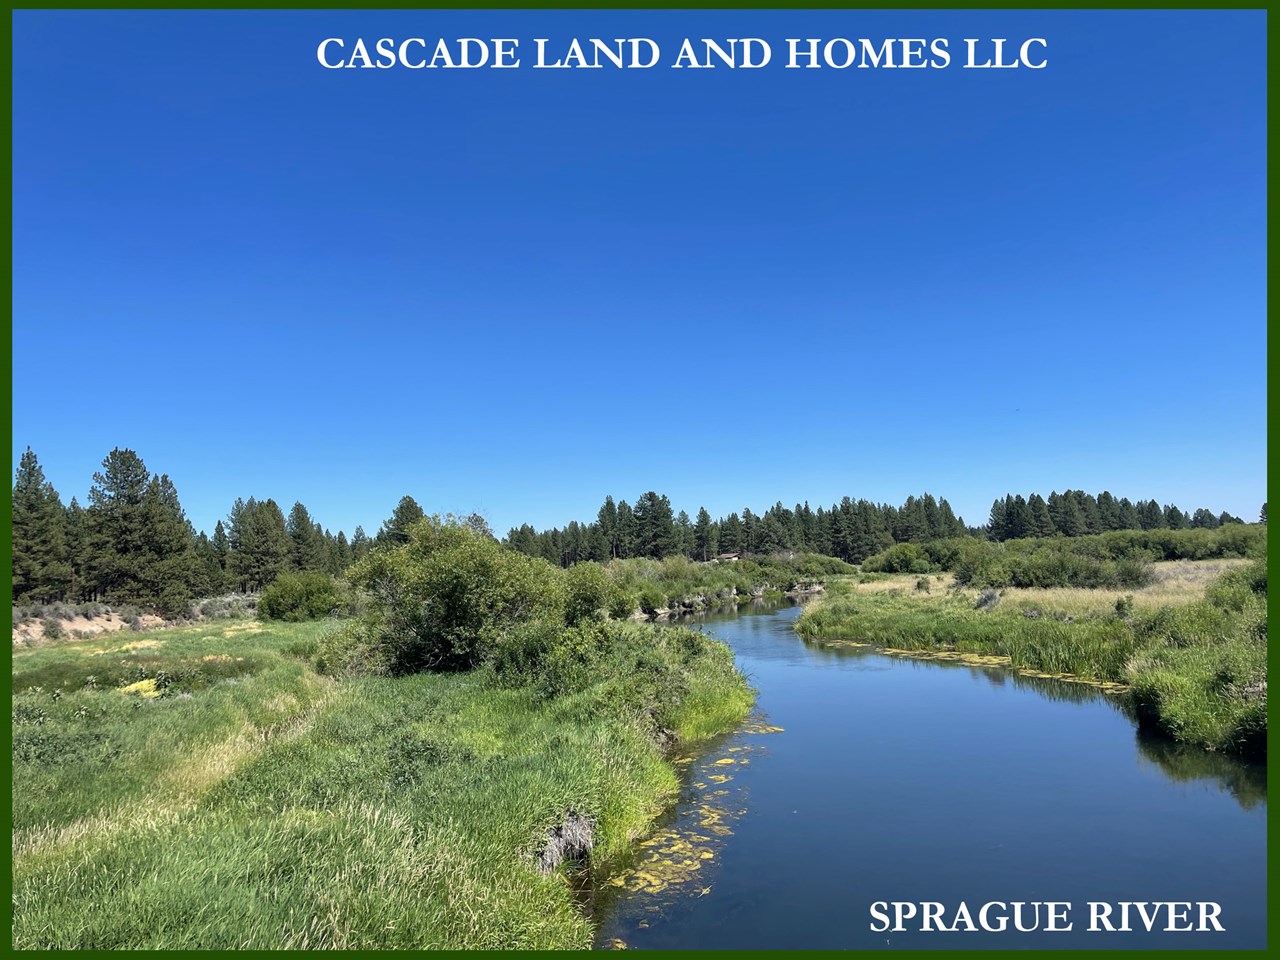 if you choose not to build yet, the property would make a great spot for a base camp or vacation spot to explore the nearby recreational opportunities! the sprague river offers fishing, fly-fishing, swimming, floating, or just watching the river peacefully flow by. if you love outdoor activities, this is the perfect place!